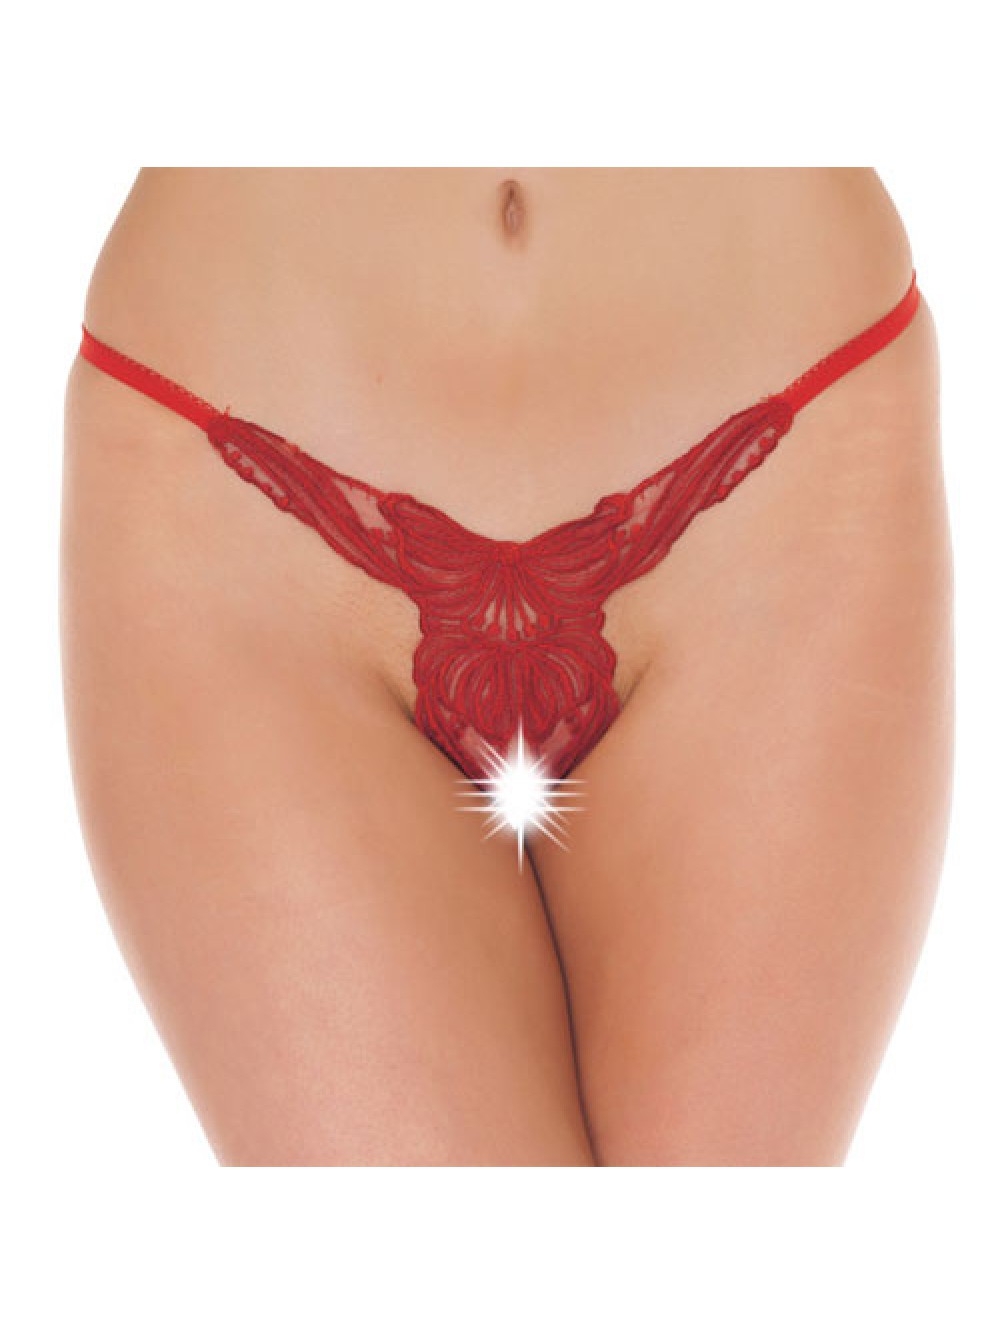 Red Crotchless G-String 8718924221129